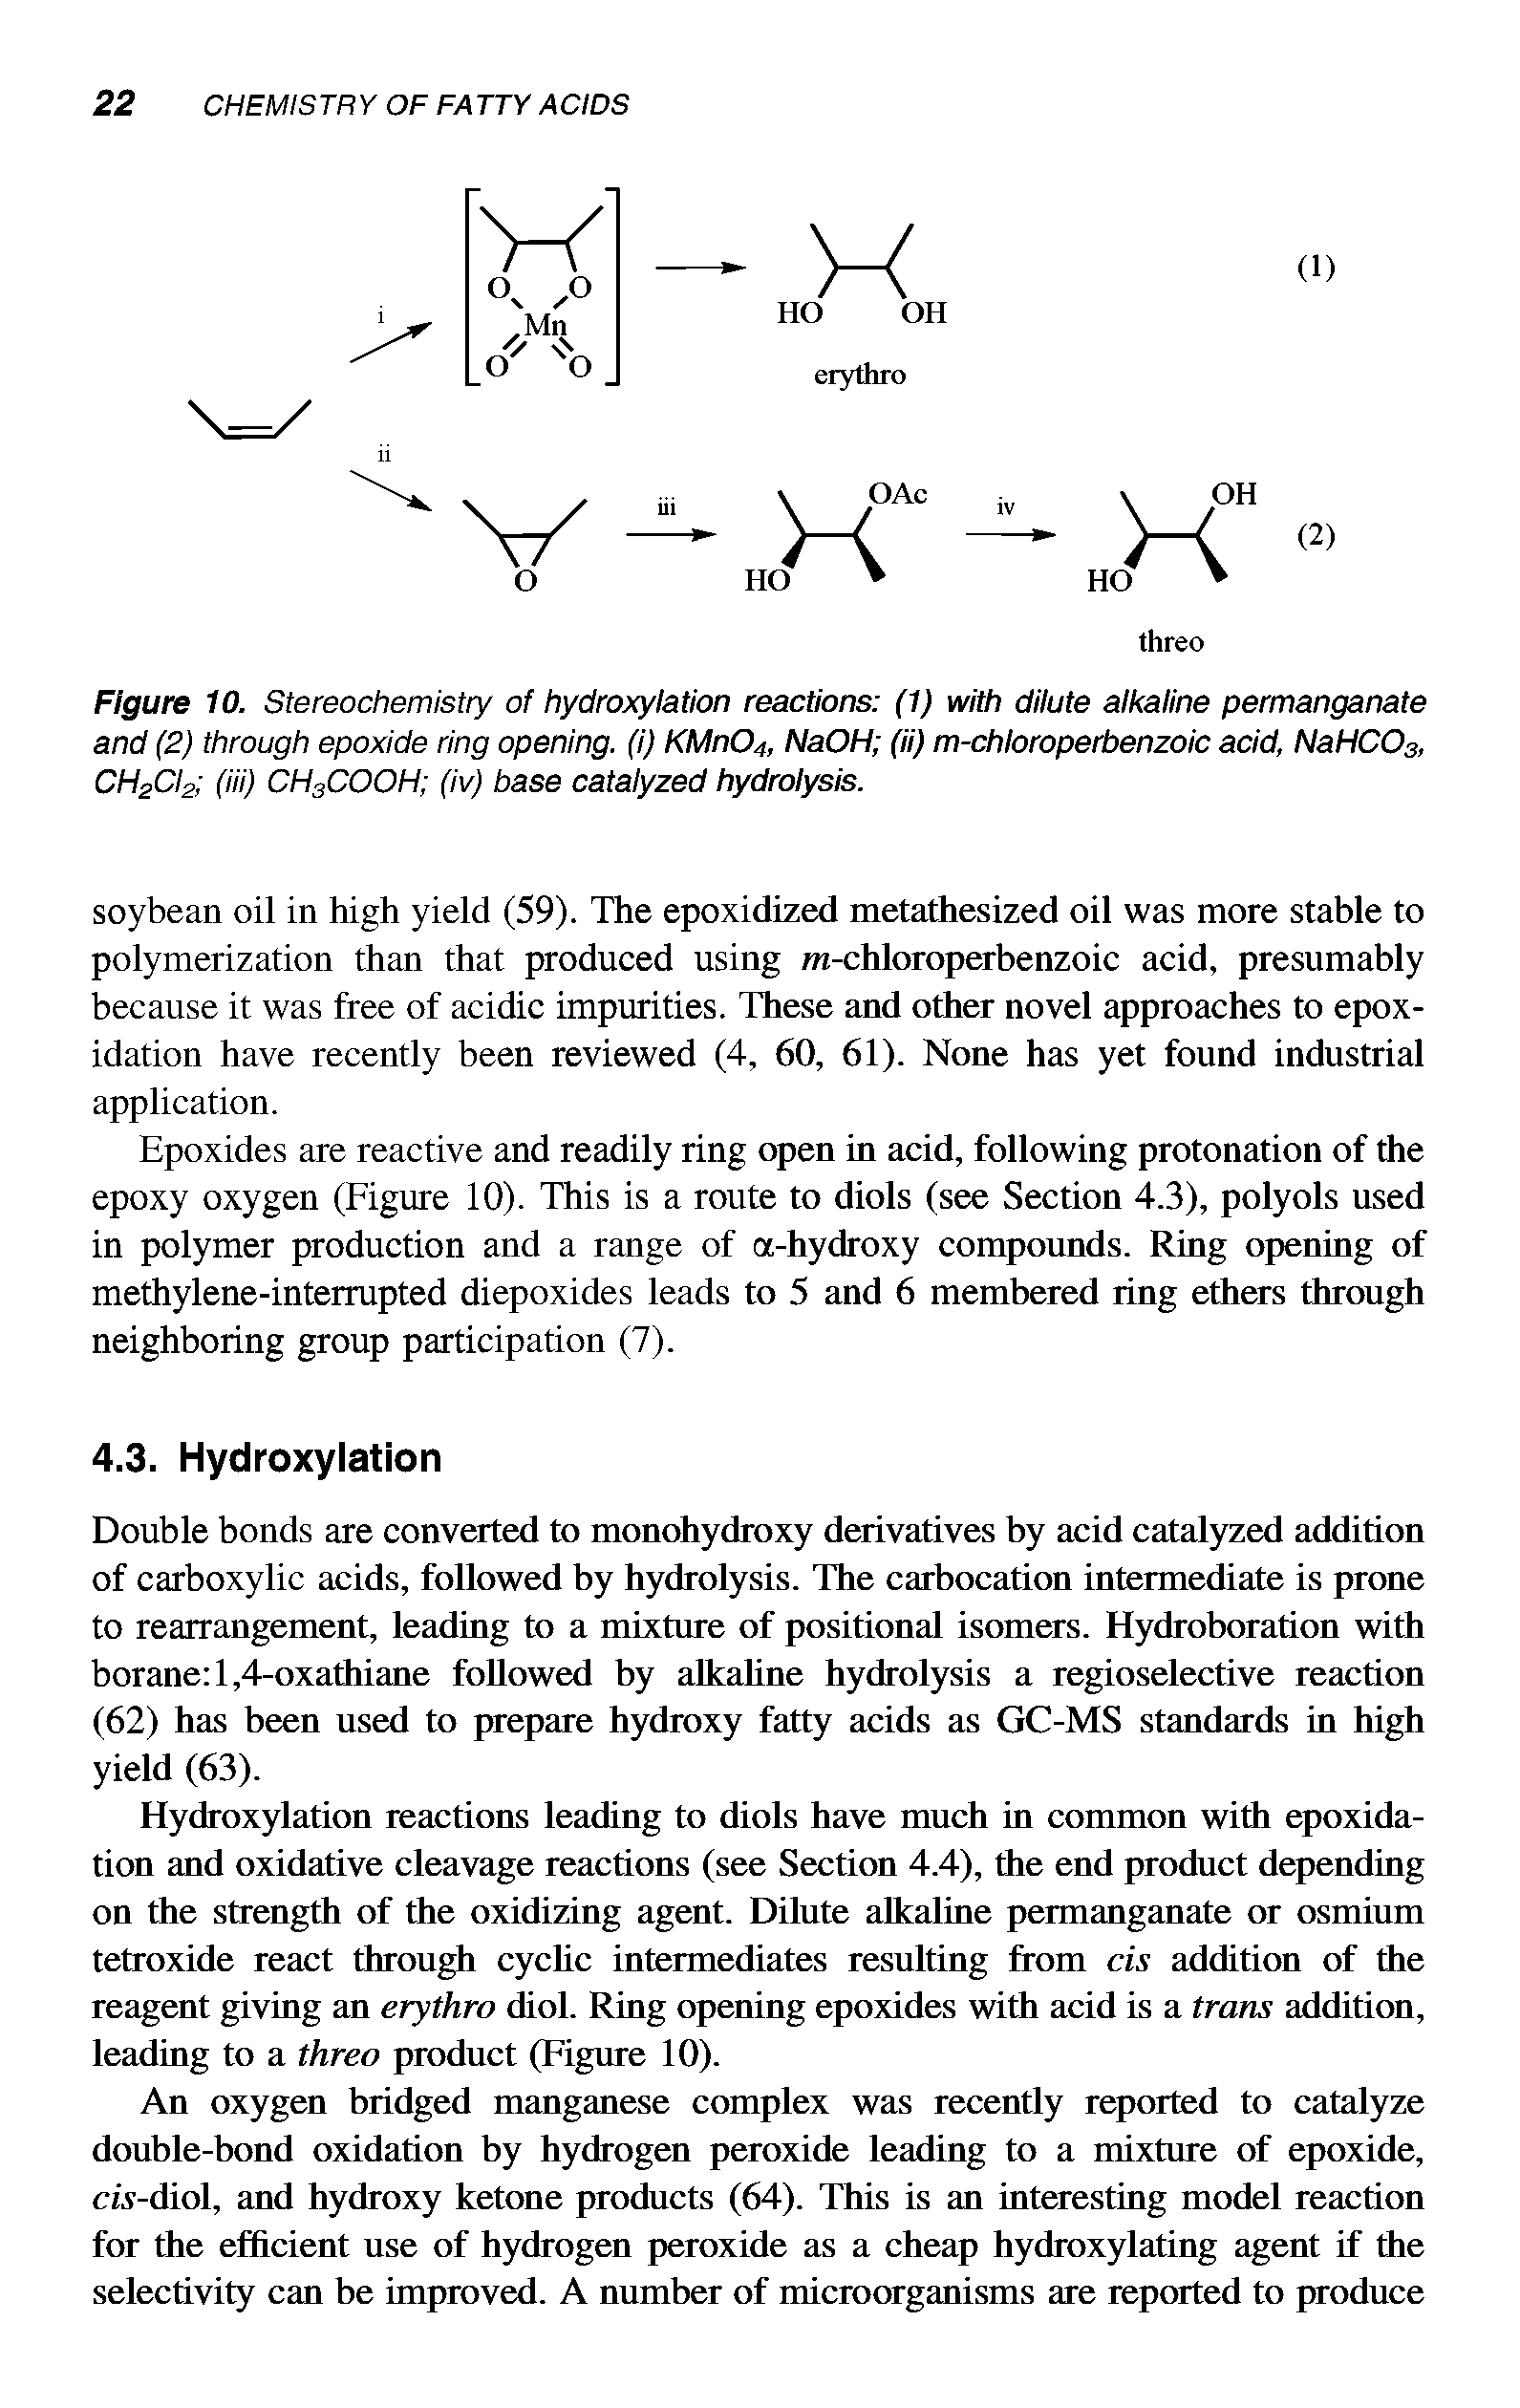 Figure 10. Stereochemistry of hydroxylation reactions (1) with dilute alkaline permanganate and (2) through epoxide ring opening, (i) KMn04, NaOH (ii) m-chloroperbenzoic acid, NaHCOs, CH2Ci2 (Hi) CH3COOH (iv) base catalyzed hydrolysis.